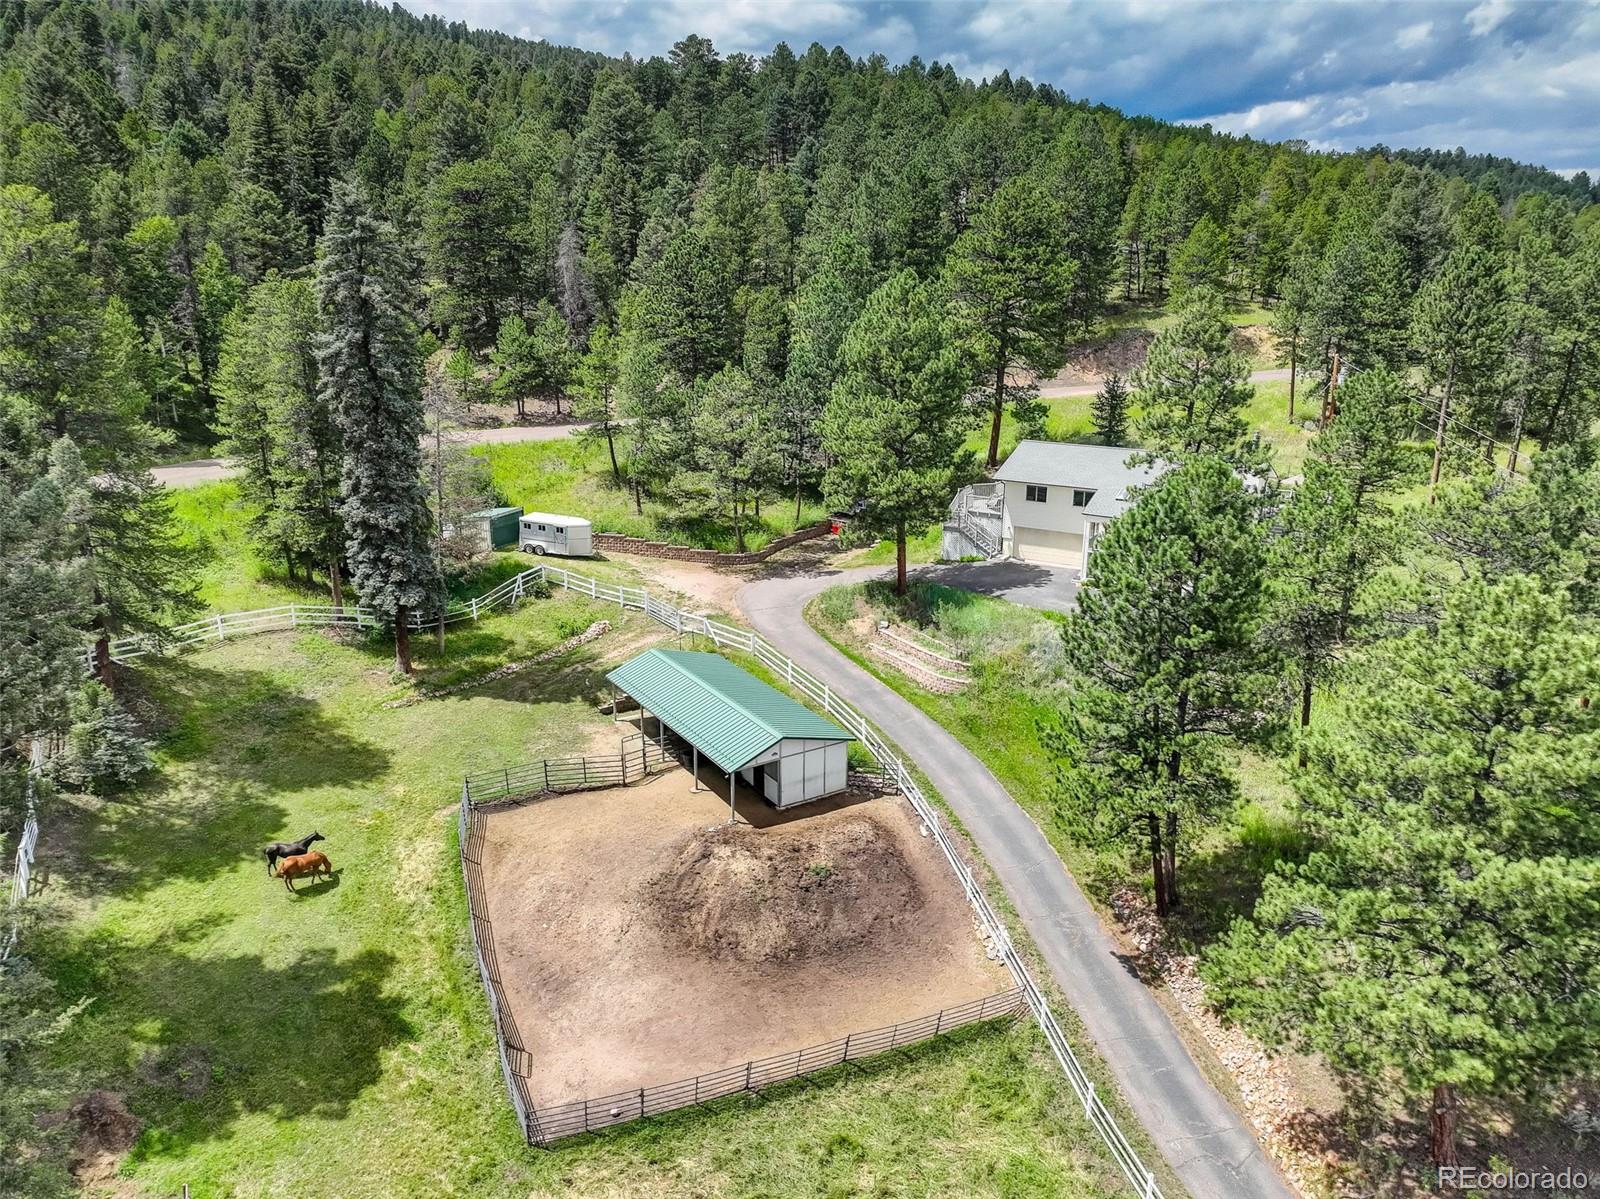 12079  tecumseh trail, Conifer sold home. Closed on 2024-02-01 for $800,000.